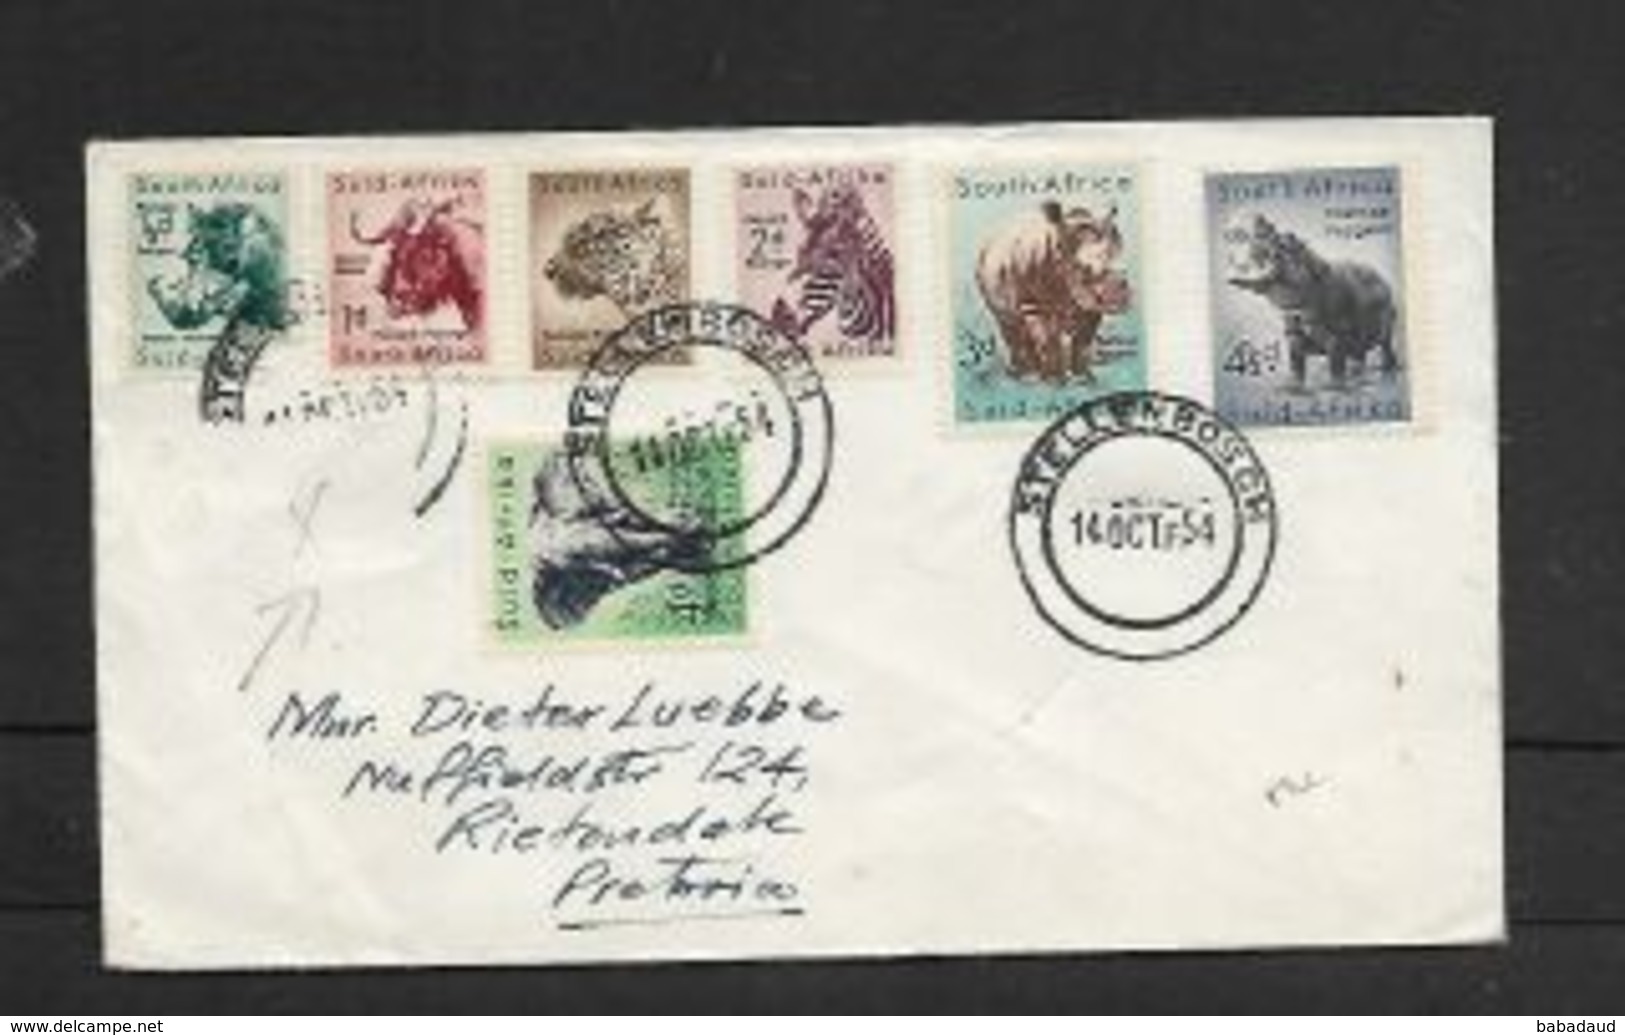 S.A.frica 1954 Wild Animals Definitives 7 Vals To 4 1/2d STELLENBOSCH 14 OCT 54, FIrst Day C.d.s. - Covers & Documents